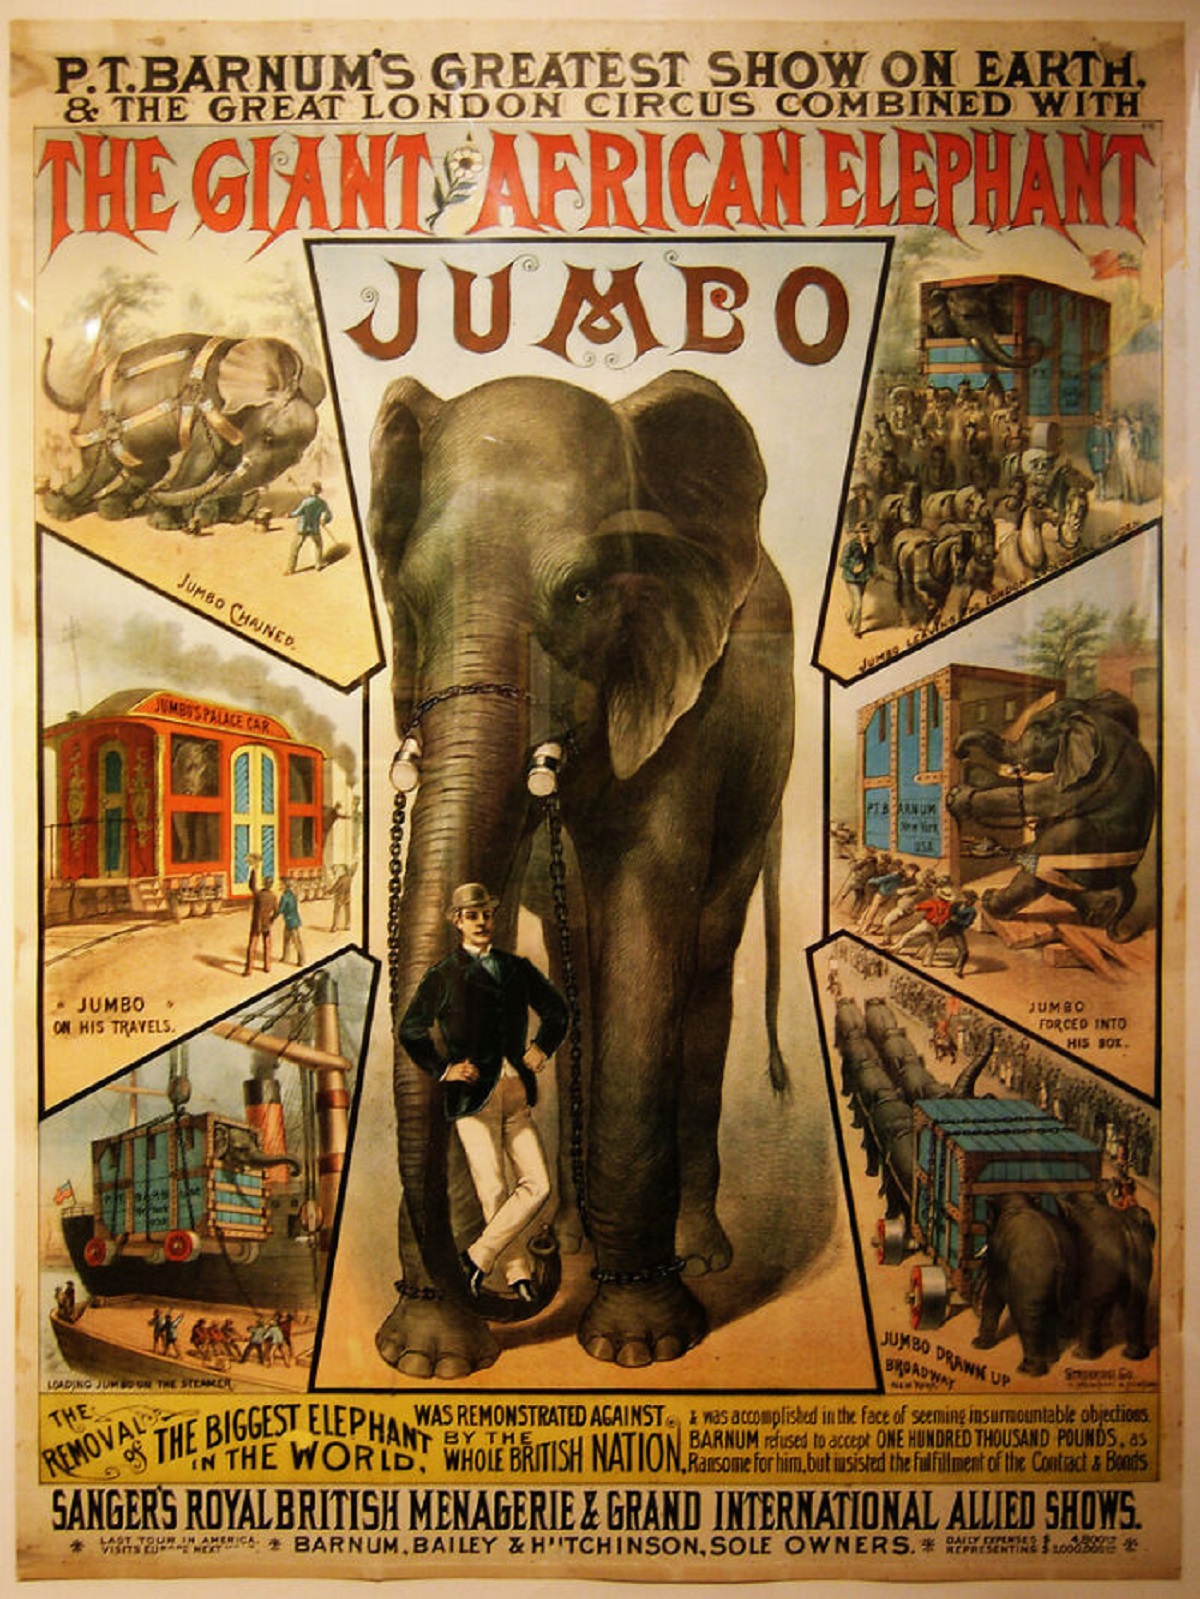 jumbo elephant - P.T.Barnum'S Greatest Show On Earth. & The Great London Circus Combined With The Giant African Elephant Jumbo Jumbo The Removal The Biggest The Worst Was Remonstrated Against in the female One Red Then, Barnum Who British Nation for hot i